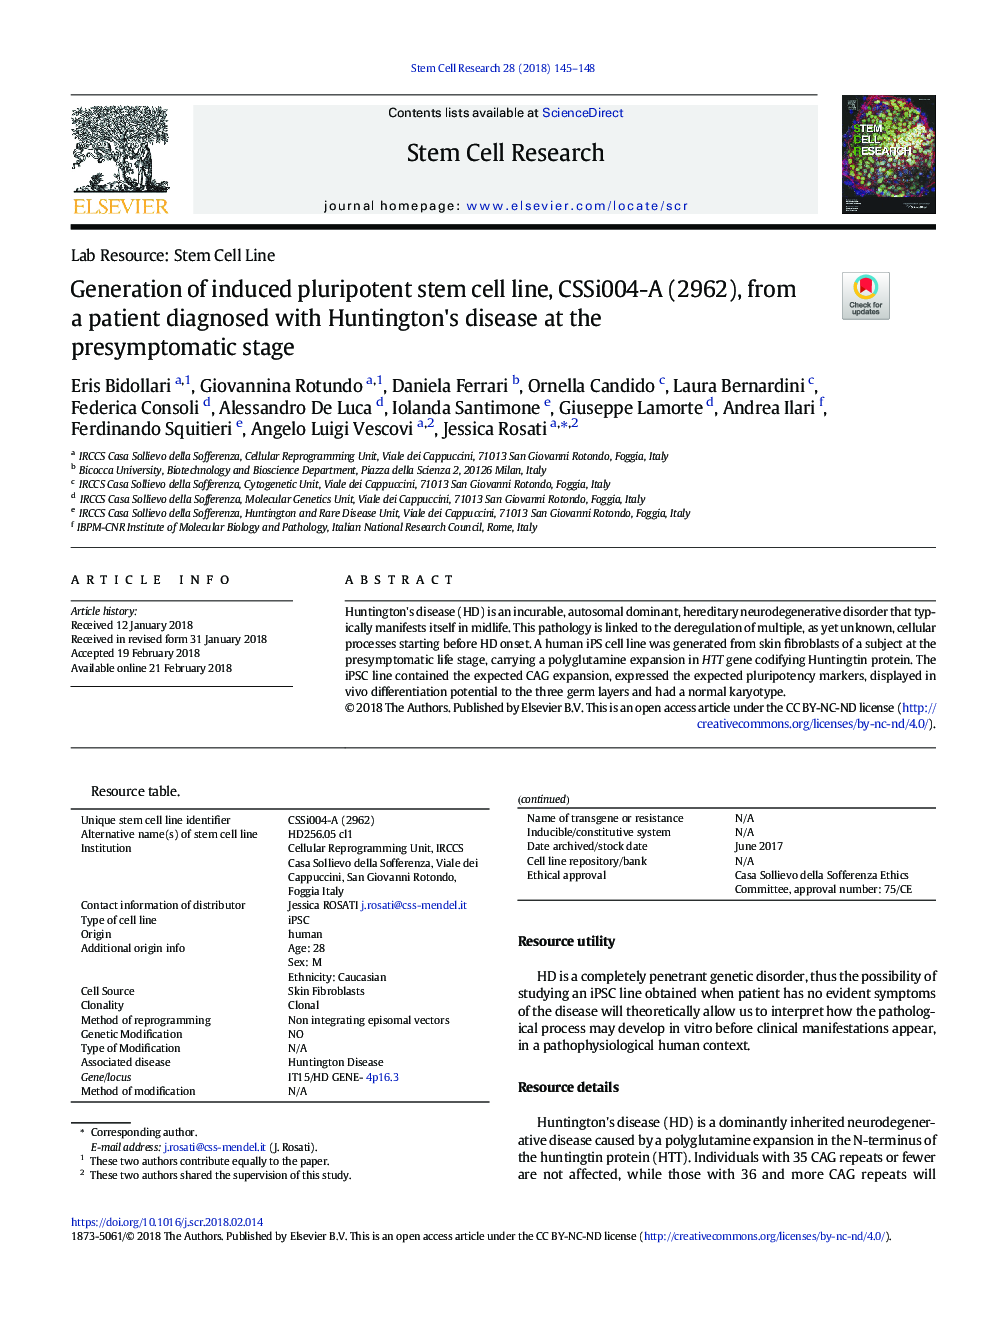 Generation of induced pluripotent stem cell line, CSSi004-A (2962), from a patient diagnosed with Huntington's disease at the presymptomatic stage